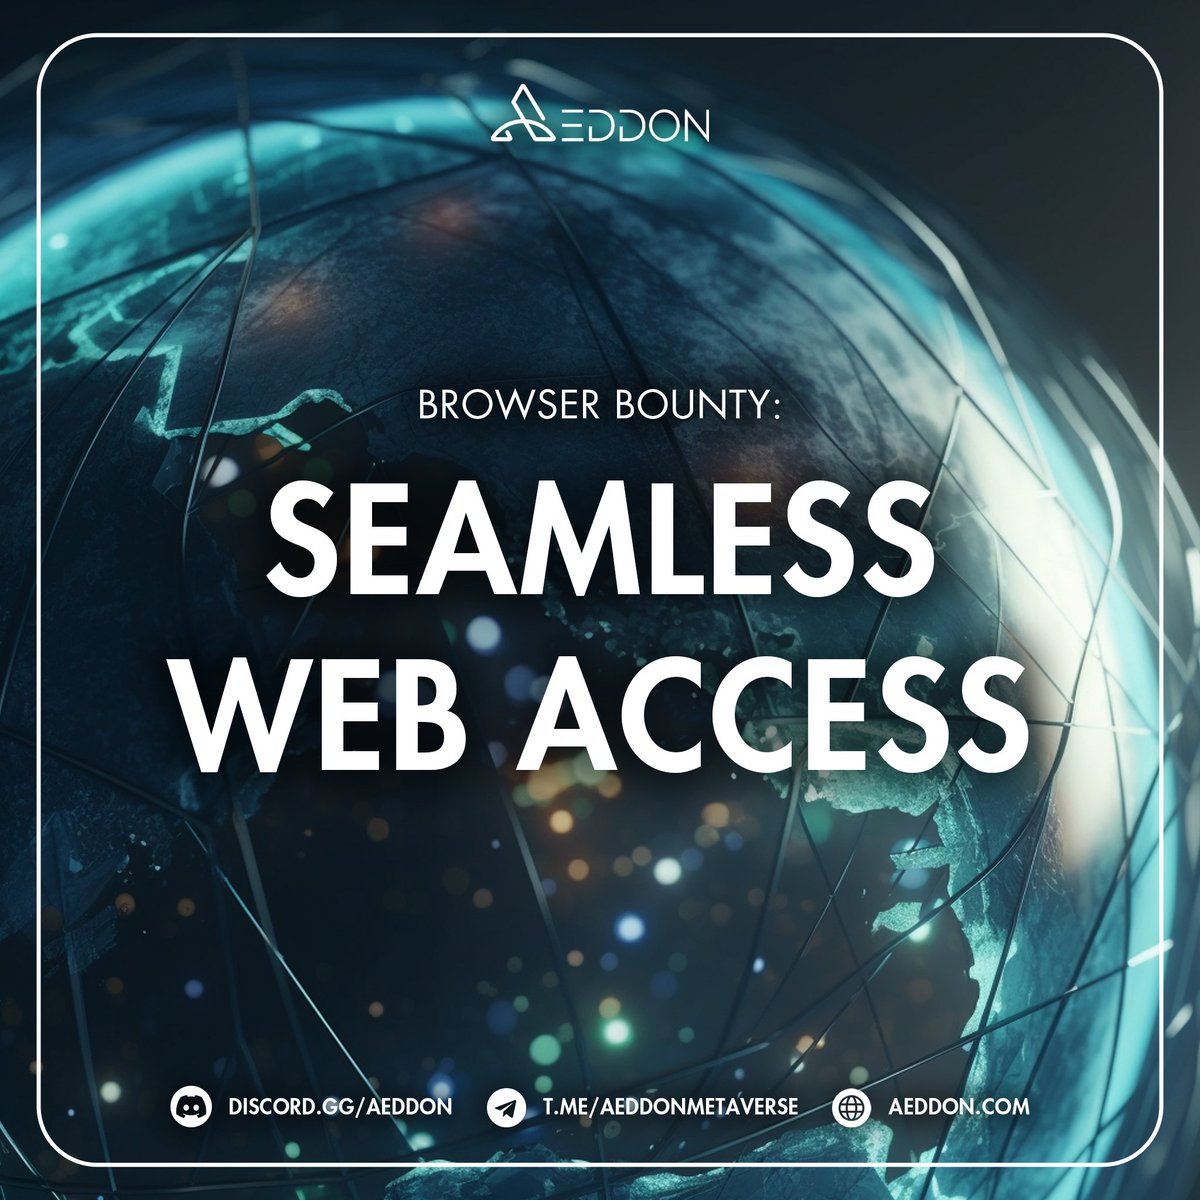 💻 Experience borderless exploration with Aeddon Metaverse right from your browser. 
No downloads, no complications - just boundless adventures at your fingertips. 
Start your digital journey with us now! 🌎 

t.me/AeddonMetaverse

#WebAccess #SeamlessConnectivity